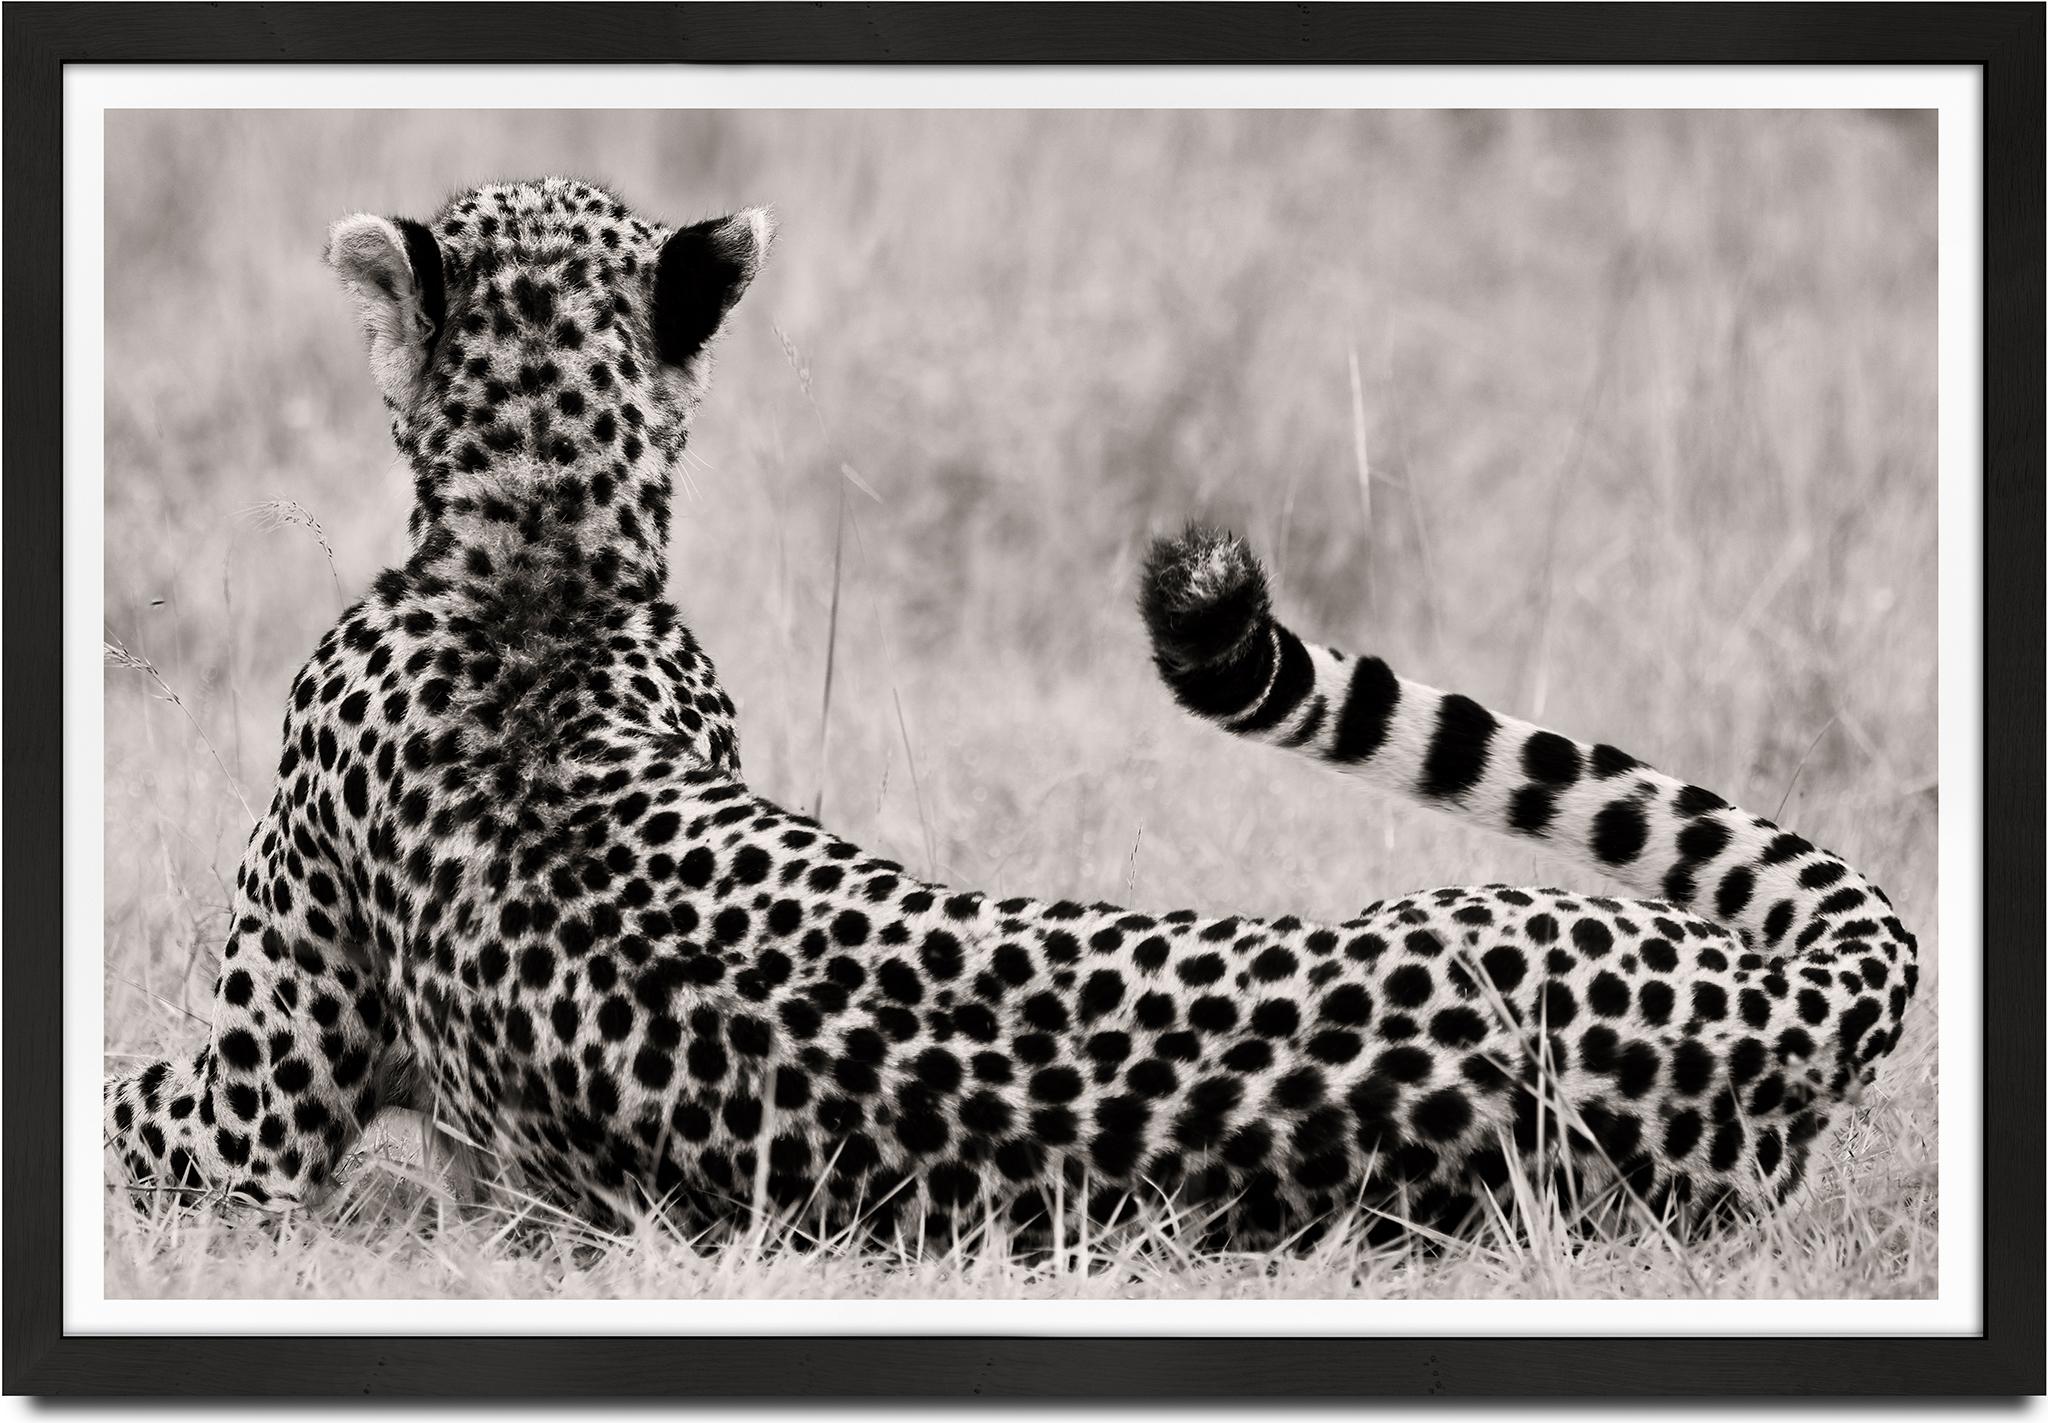 The Divine, Cheetah, black and hwite photography, Africa, Portrait, Wildlife - Photograph by Joachim Schmeisser